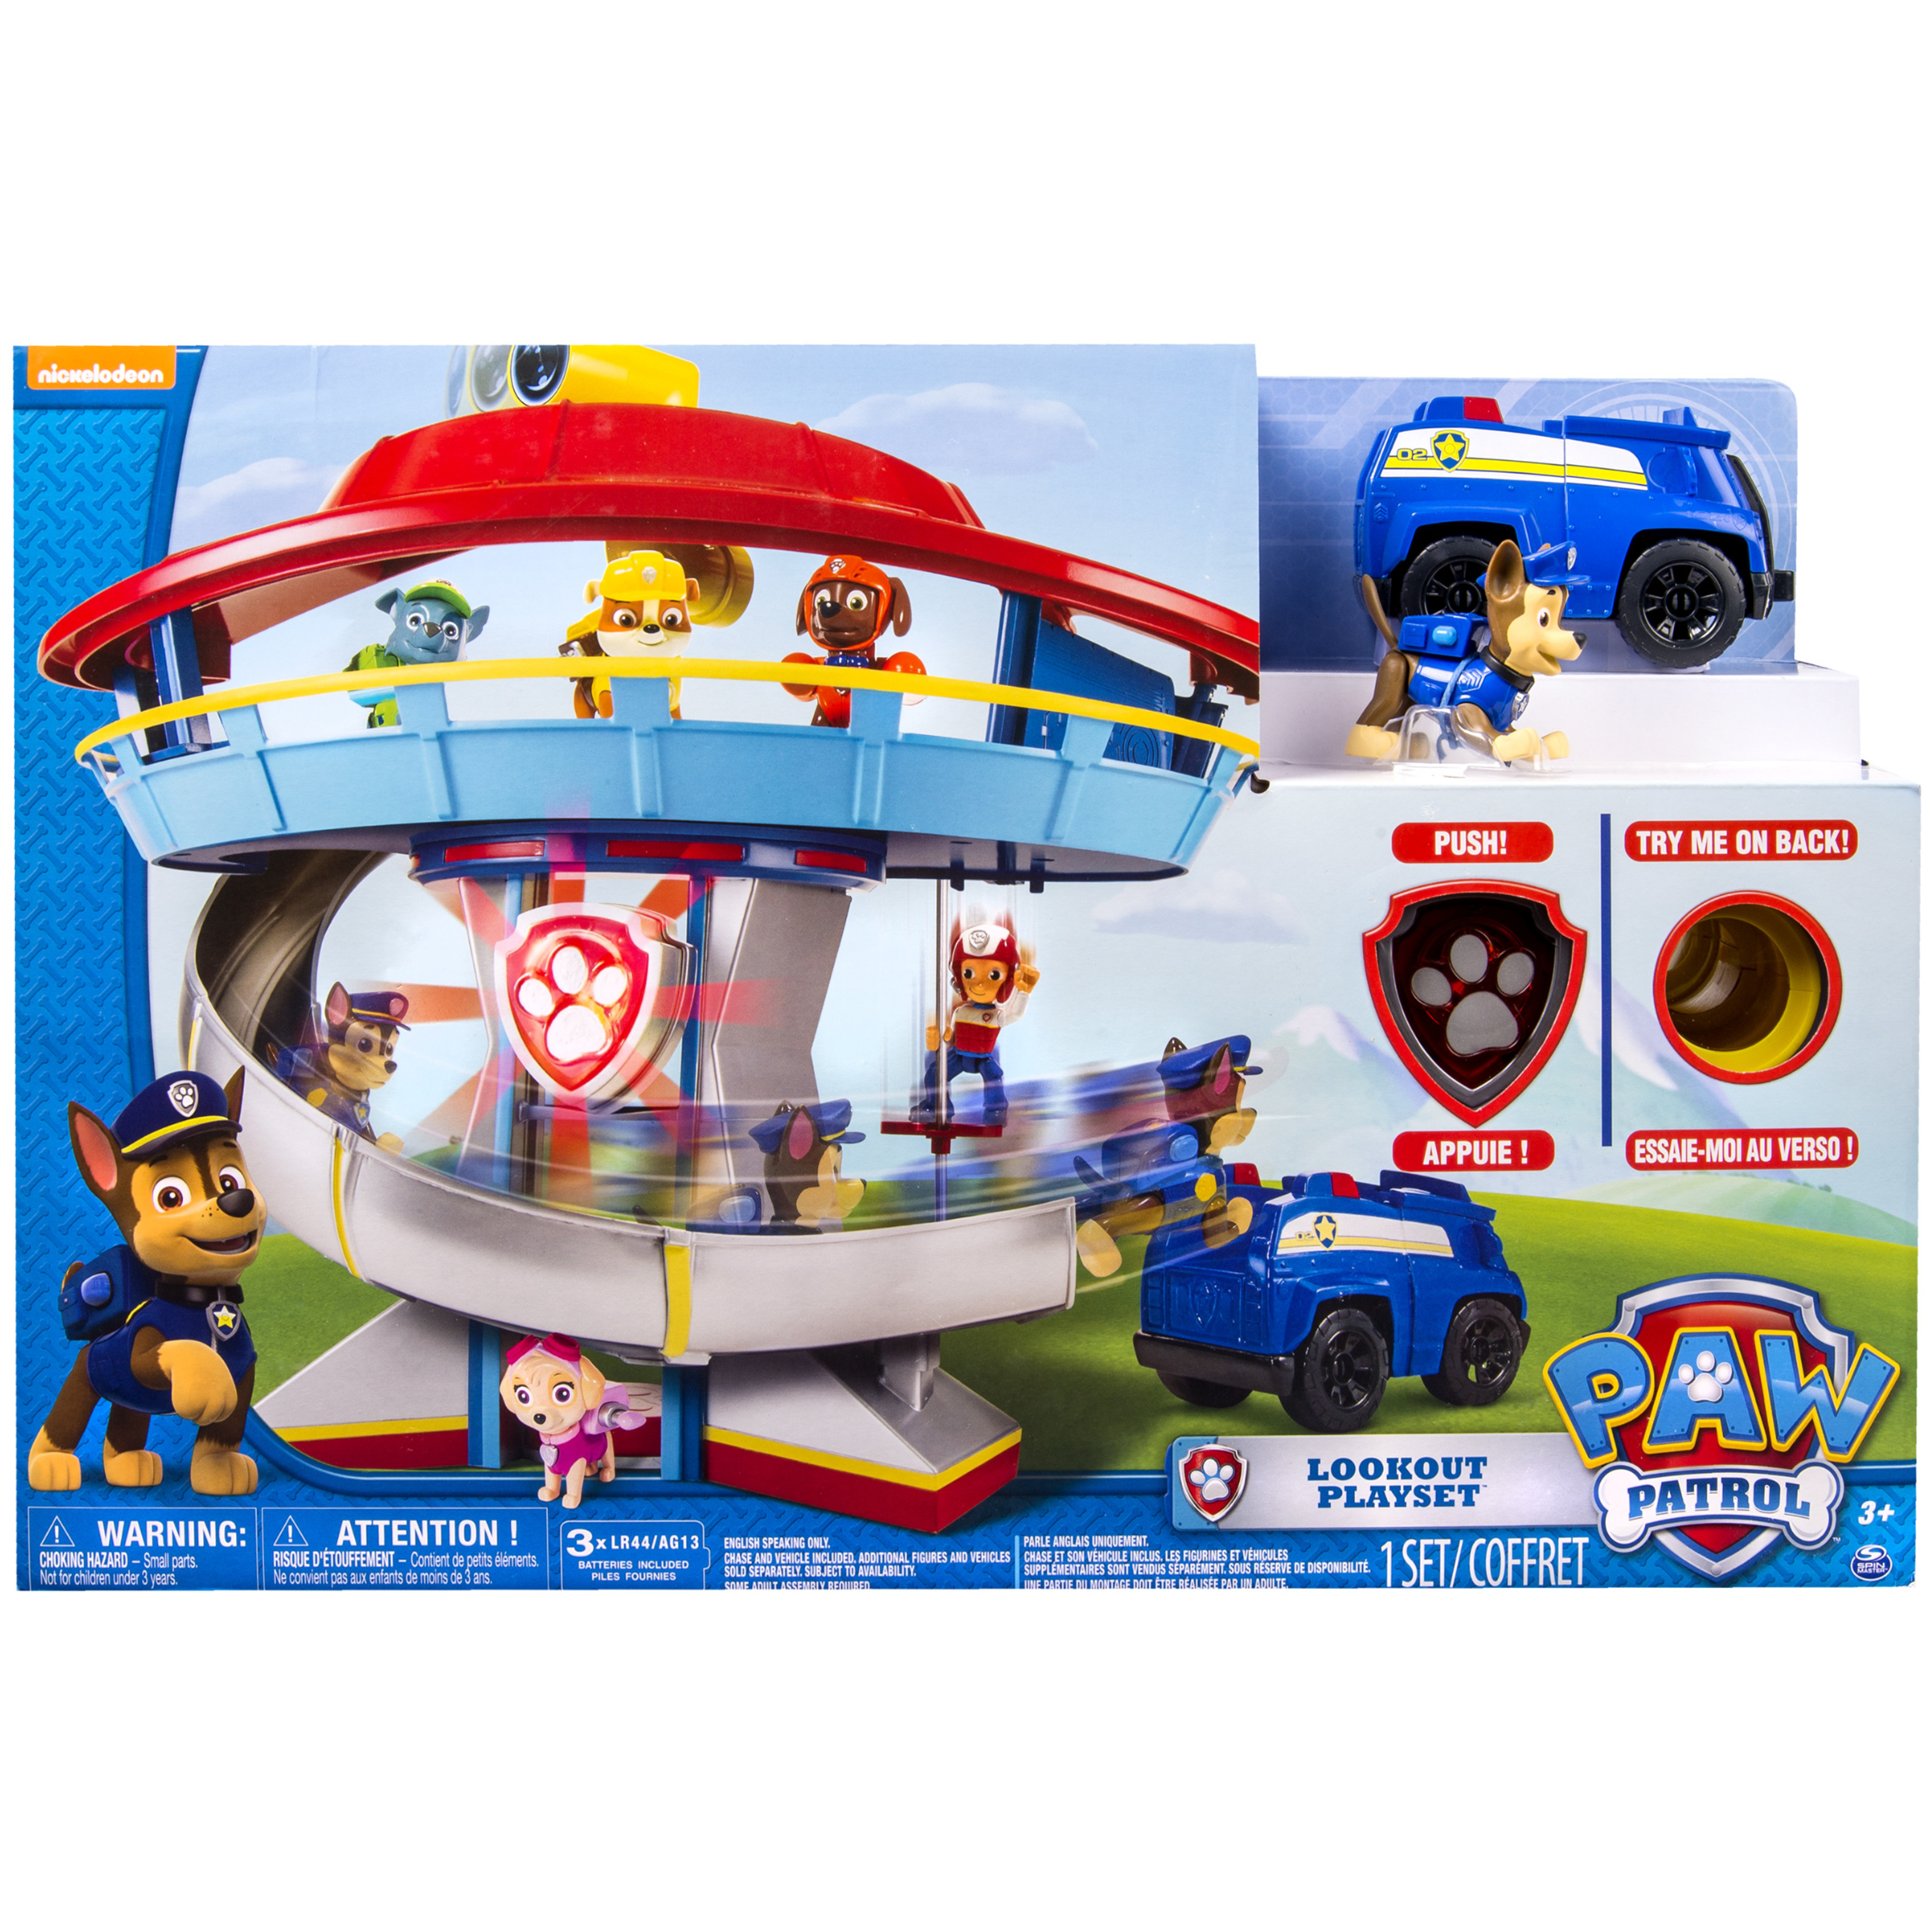 Paw Patrol Look-out Playset, Vehicle and Figure - image 5 of 6